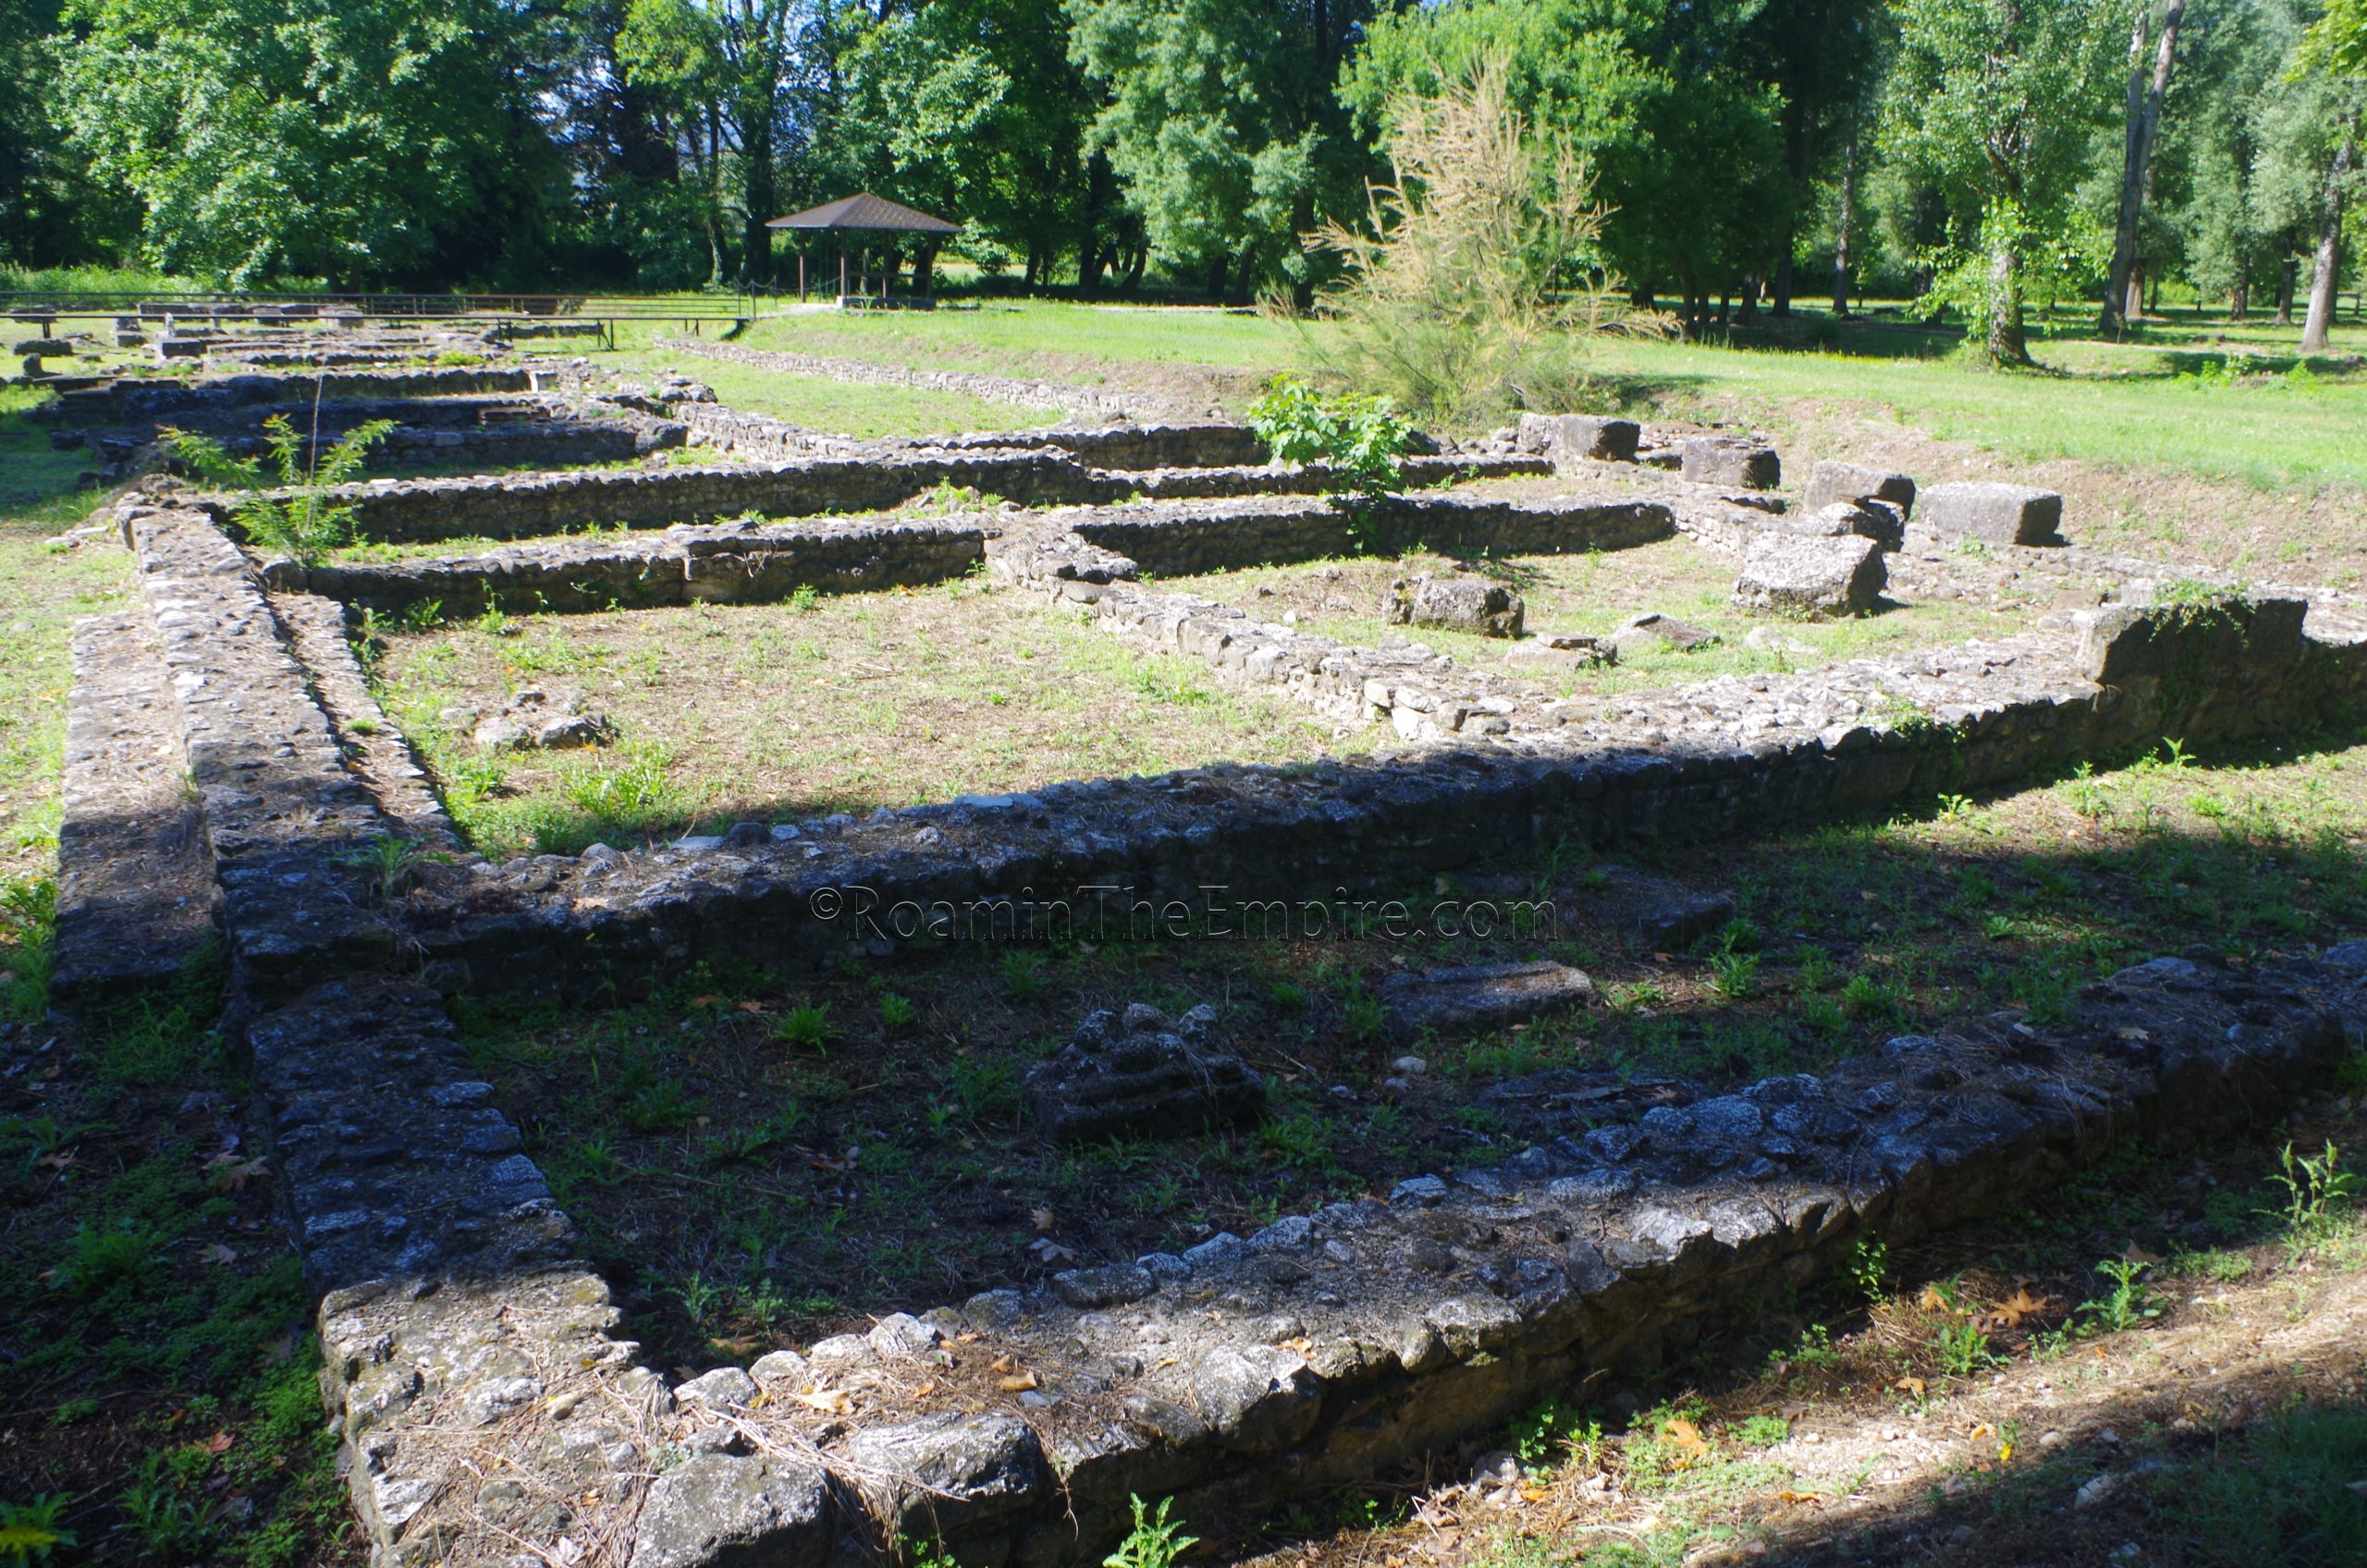 Roman buildings in the northern part of the Sanctuary of Demeter.